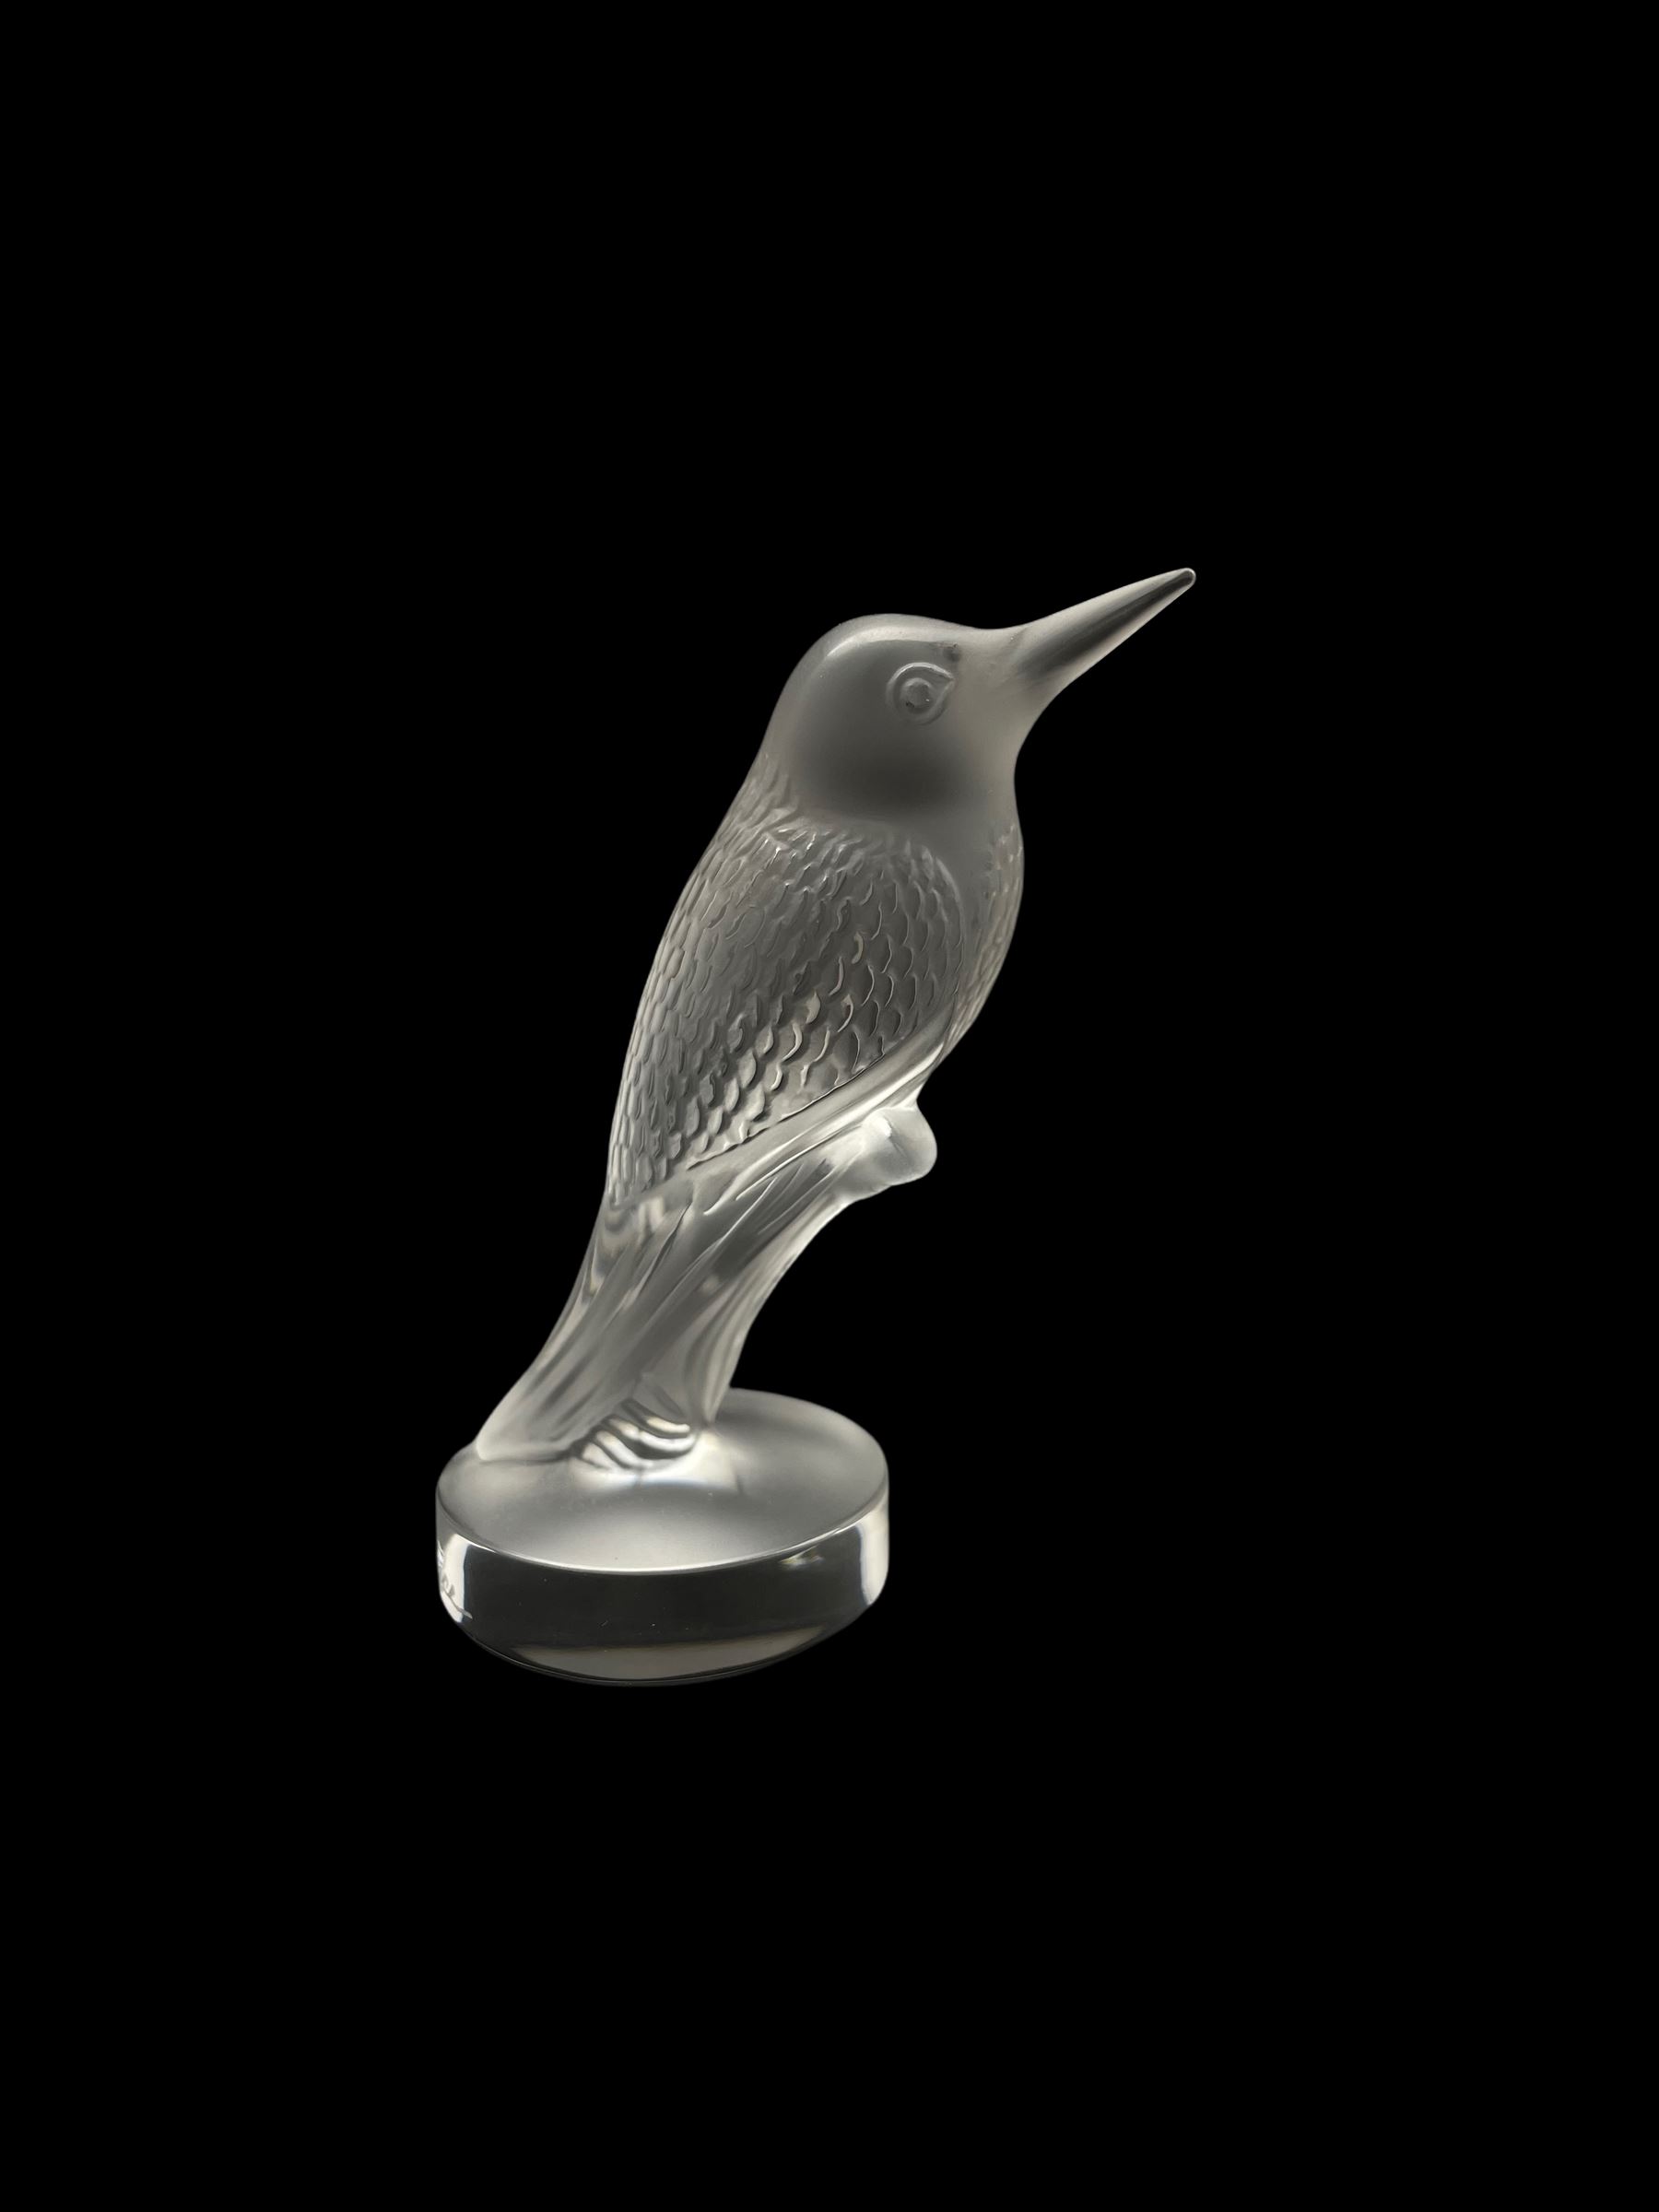 Lalique frosted glass model of a Kingfisher - Image 2 of 3